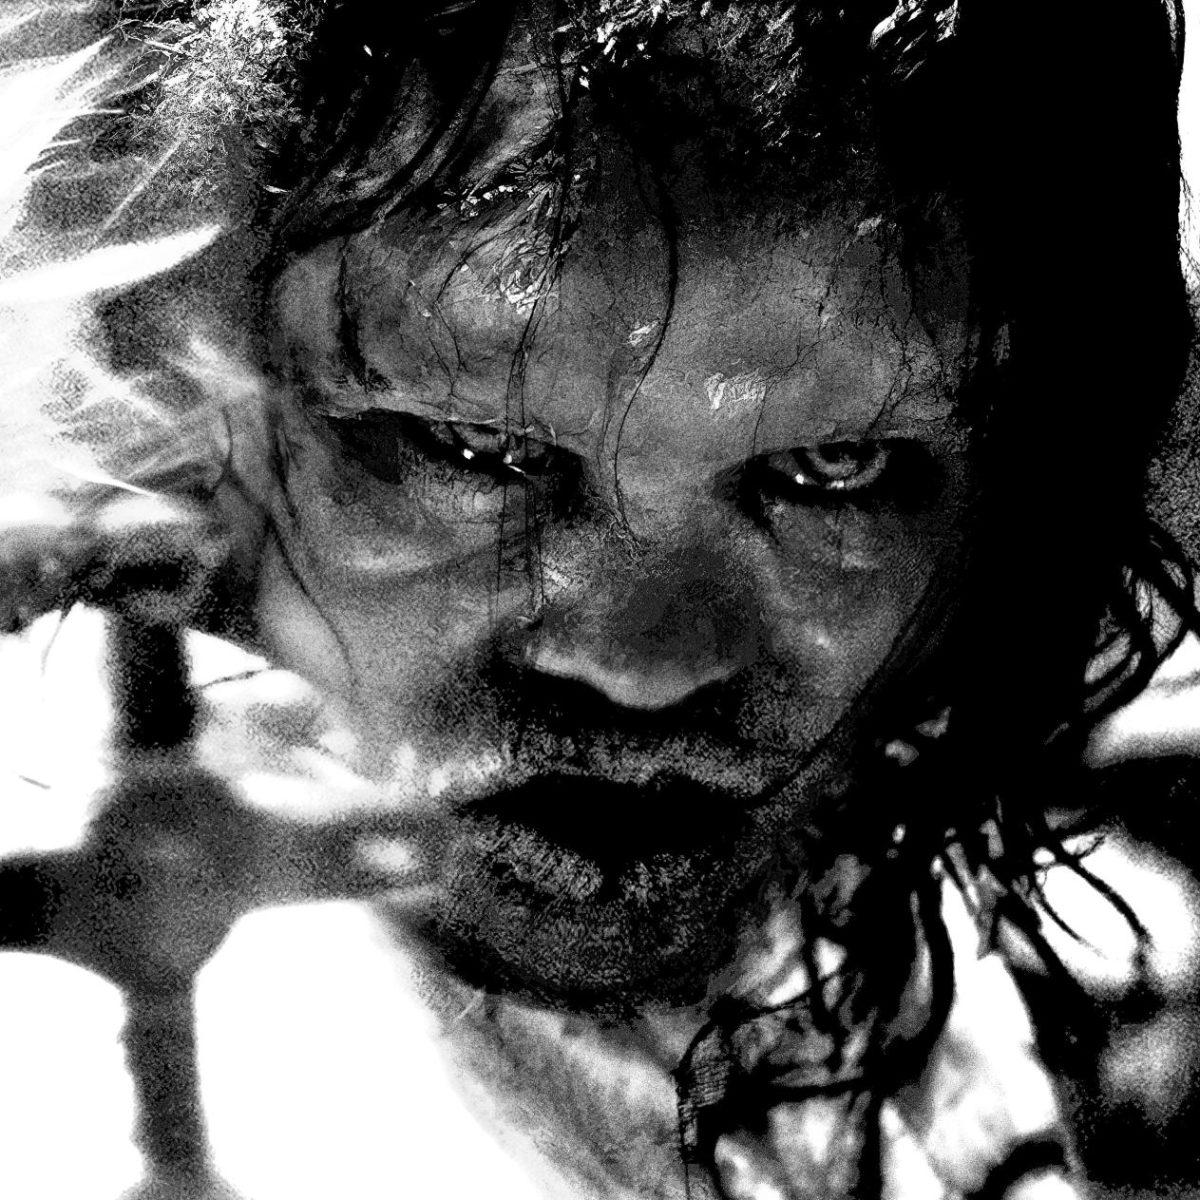 The+Exorcist+Believer+in+theaters+now.+Scary+halloween+movie+will+make+you+jump+out+of+you+chair.+With+the+halloween+season+starting+add+this+new+film+to+your+list+of+movies+you+need+to+watch.+